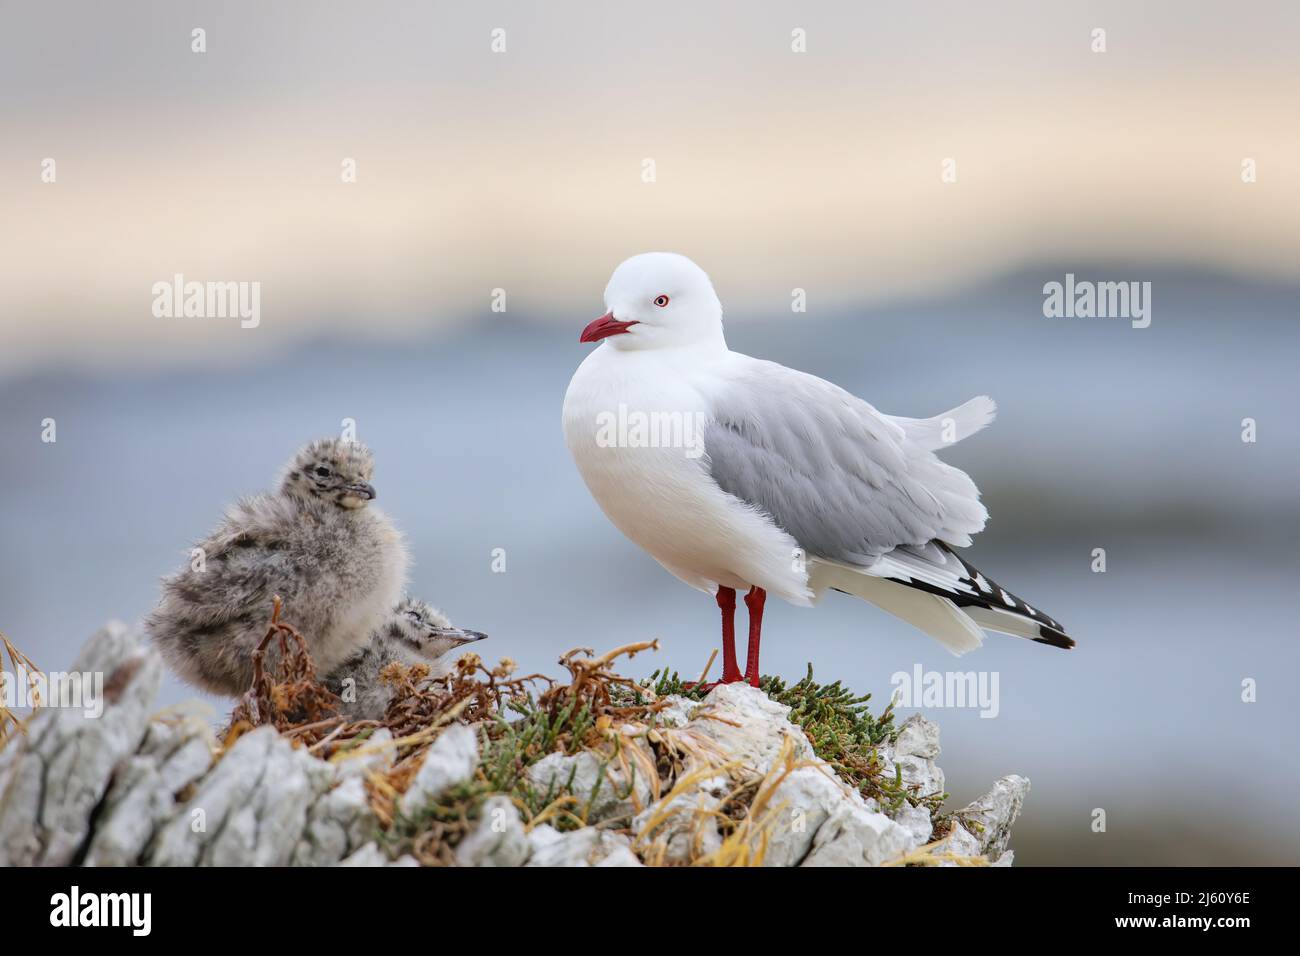 Red-billed gull with small chicks, Kaikoura peninsula, South Island, New Zealand. This bird is native to New Zealand. Stock Photo